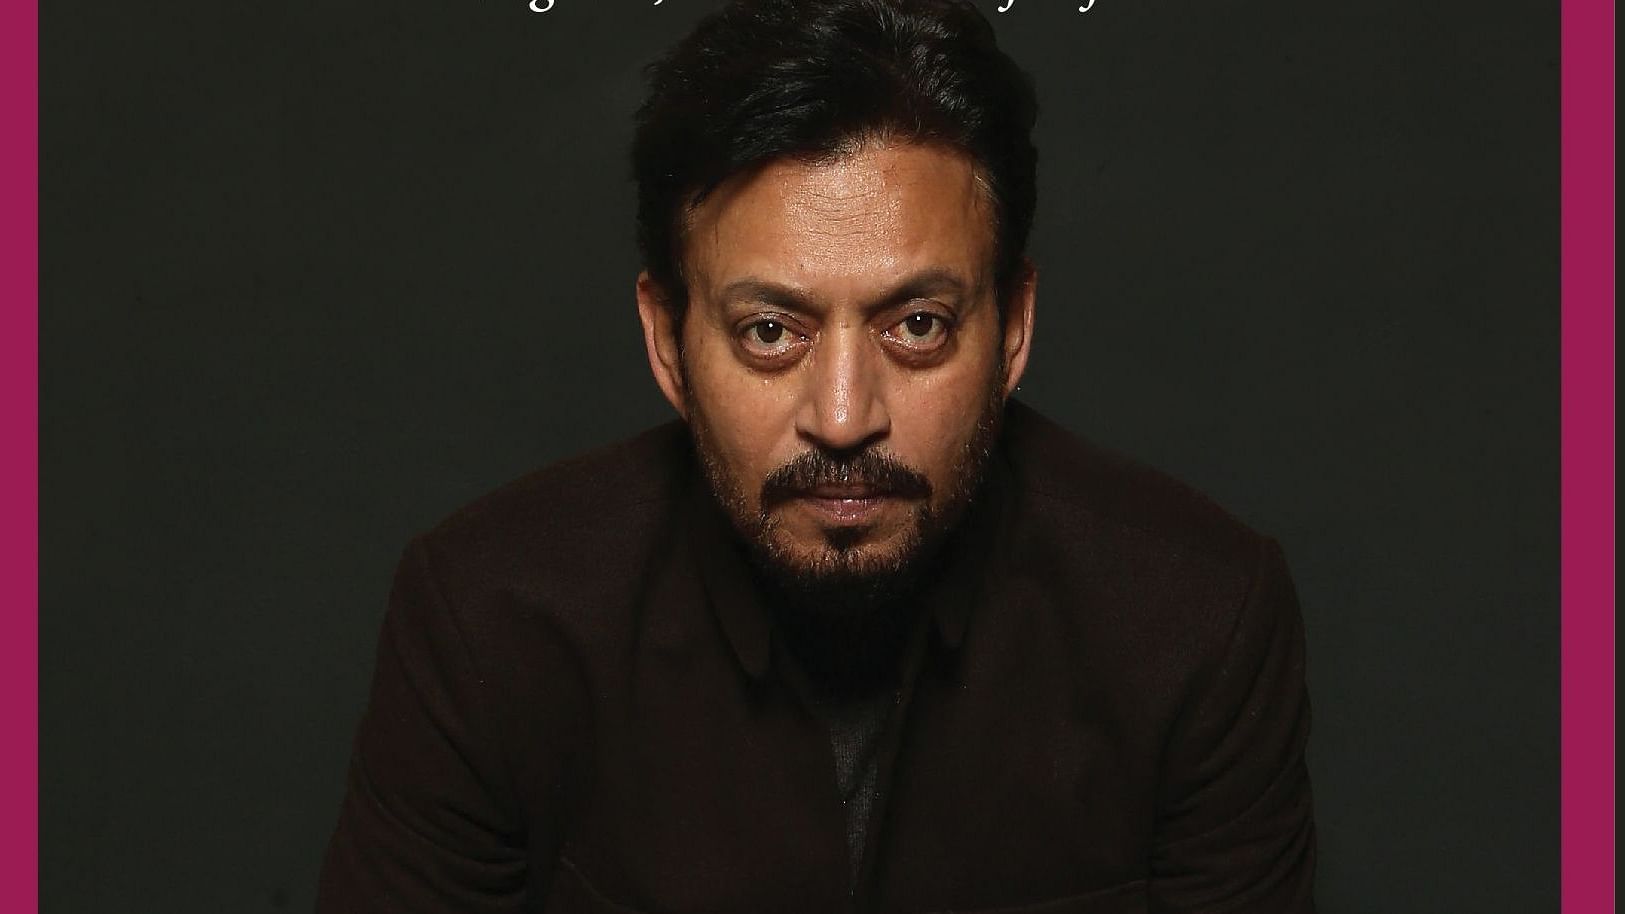 Irrfan Khan’s recently released biography <i>Irrfan Khan: The Man, The Dreamer, The Star</i>